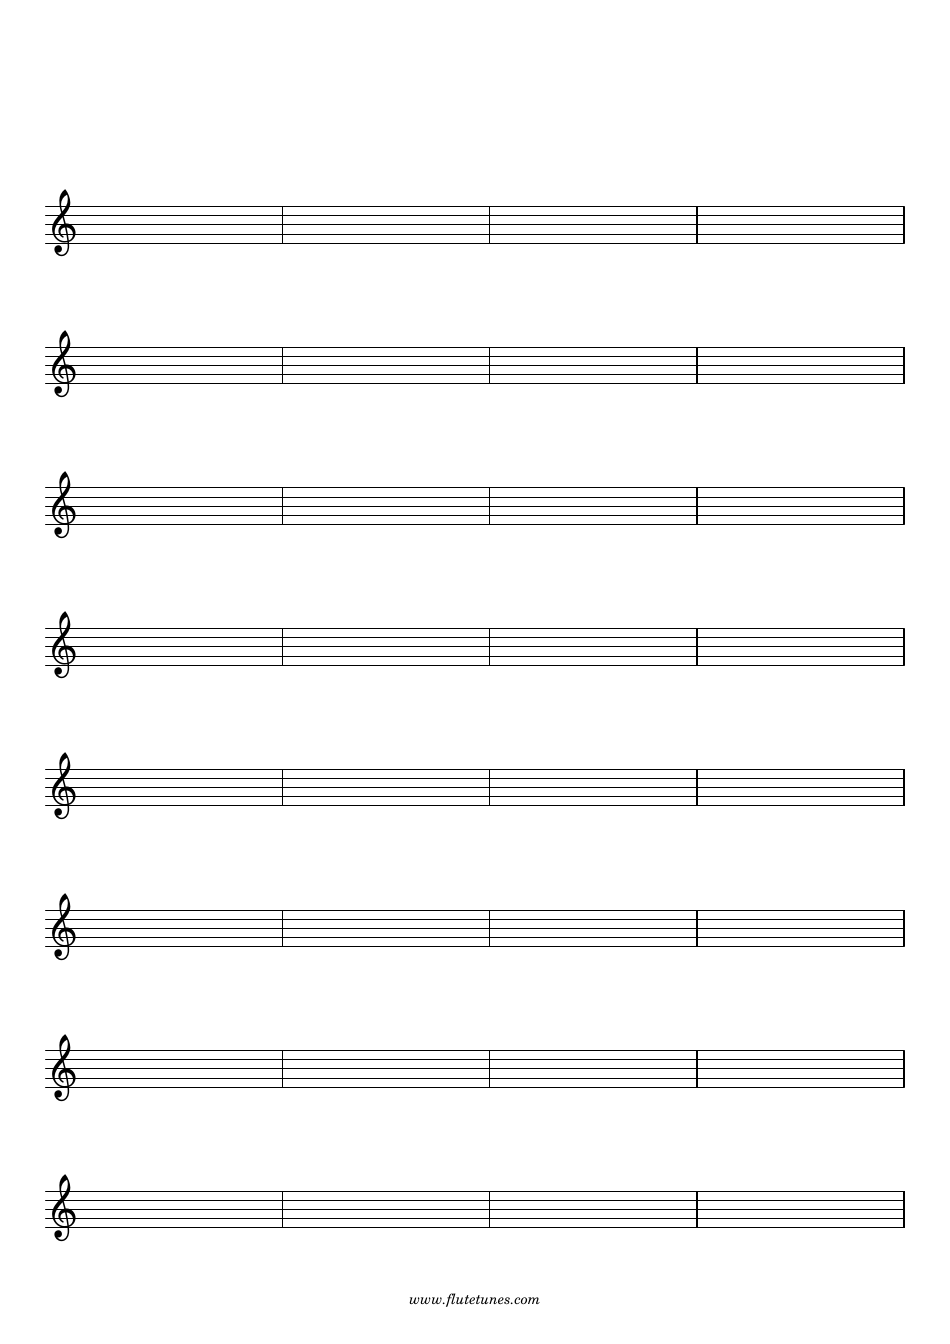 blank-staff-paper-8-staves-32-bars-treble-clef-download-printable-pdf-templateroller